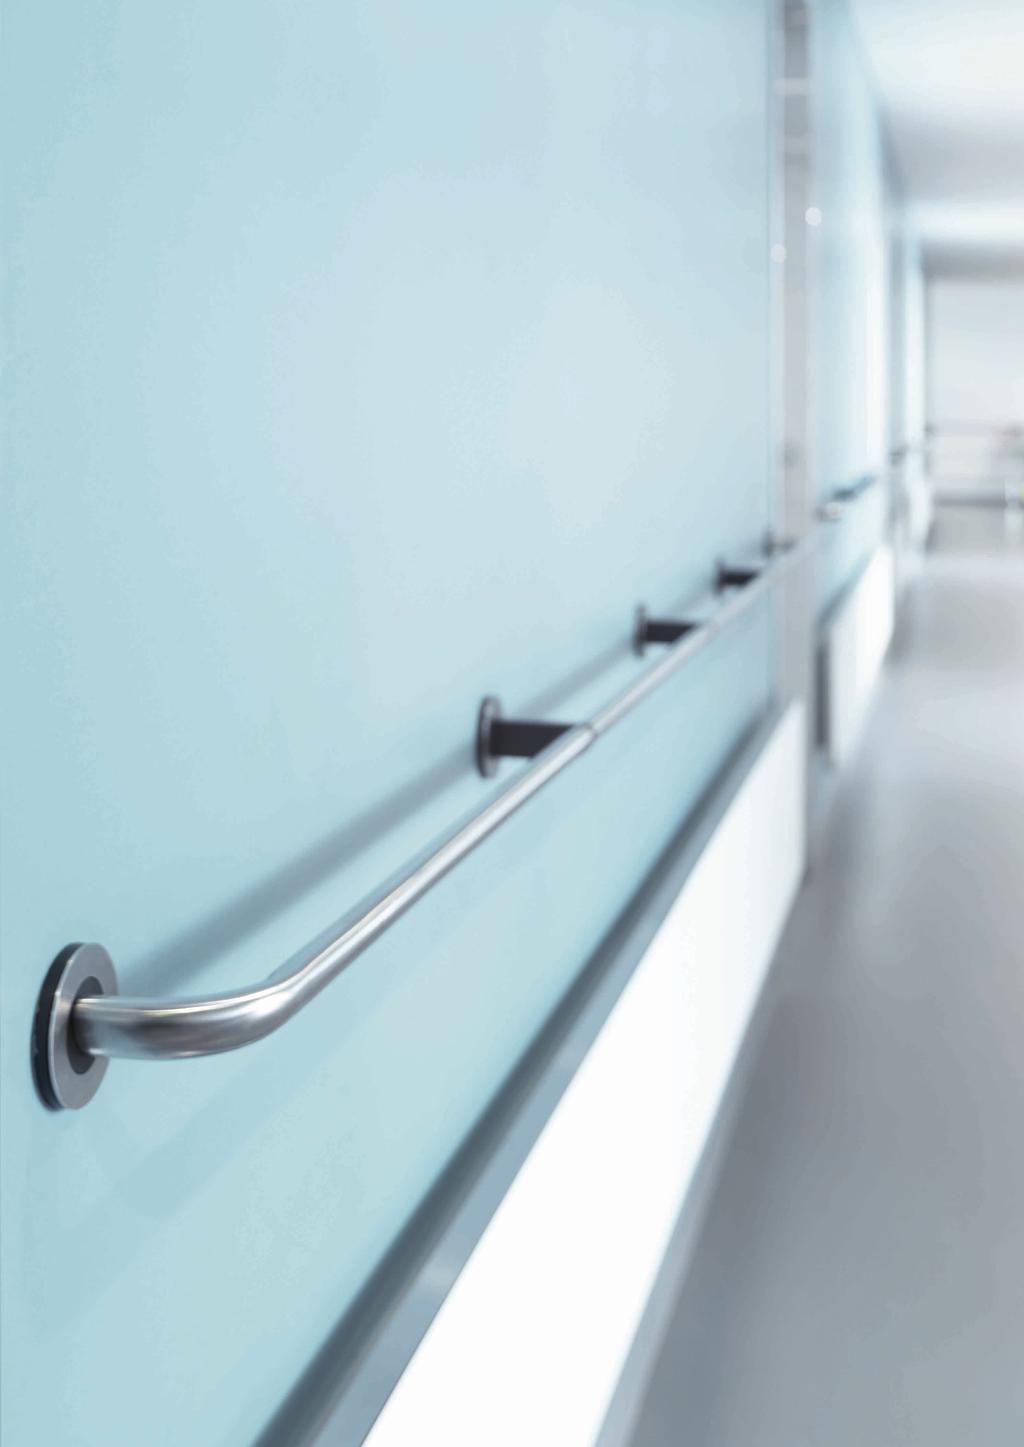 Aluminium and stainless steel FSB products literally have a good handle on cleanliness: the FSB Anti-Infection